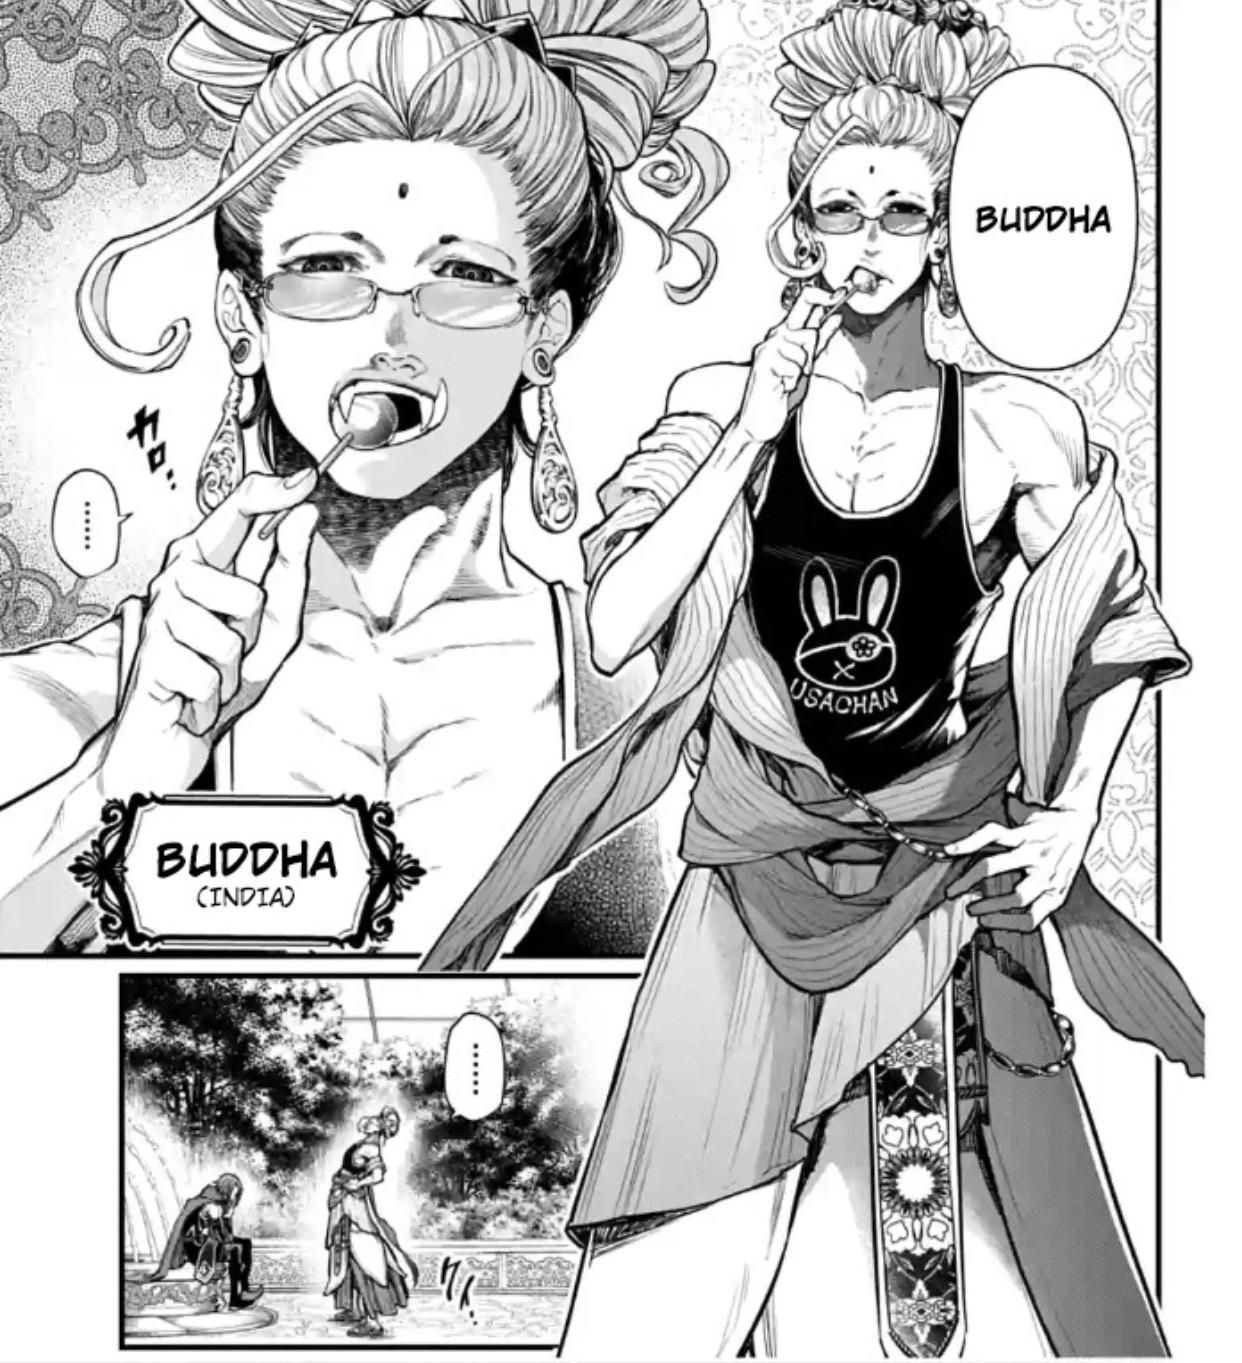 Buddha looks sick (Record of Ragnarok)follow up or reply to this content. Record of ragnarok, Manga collection, Records of ragnarok